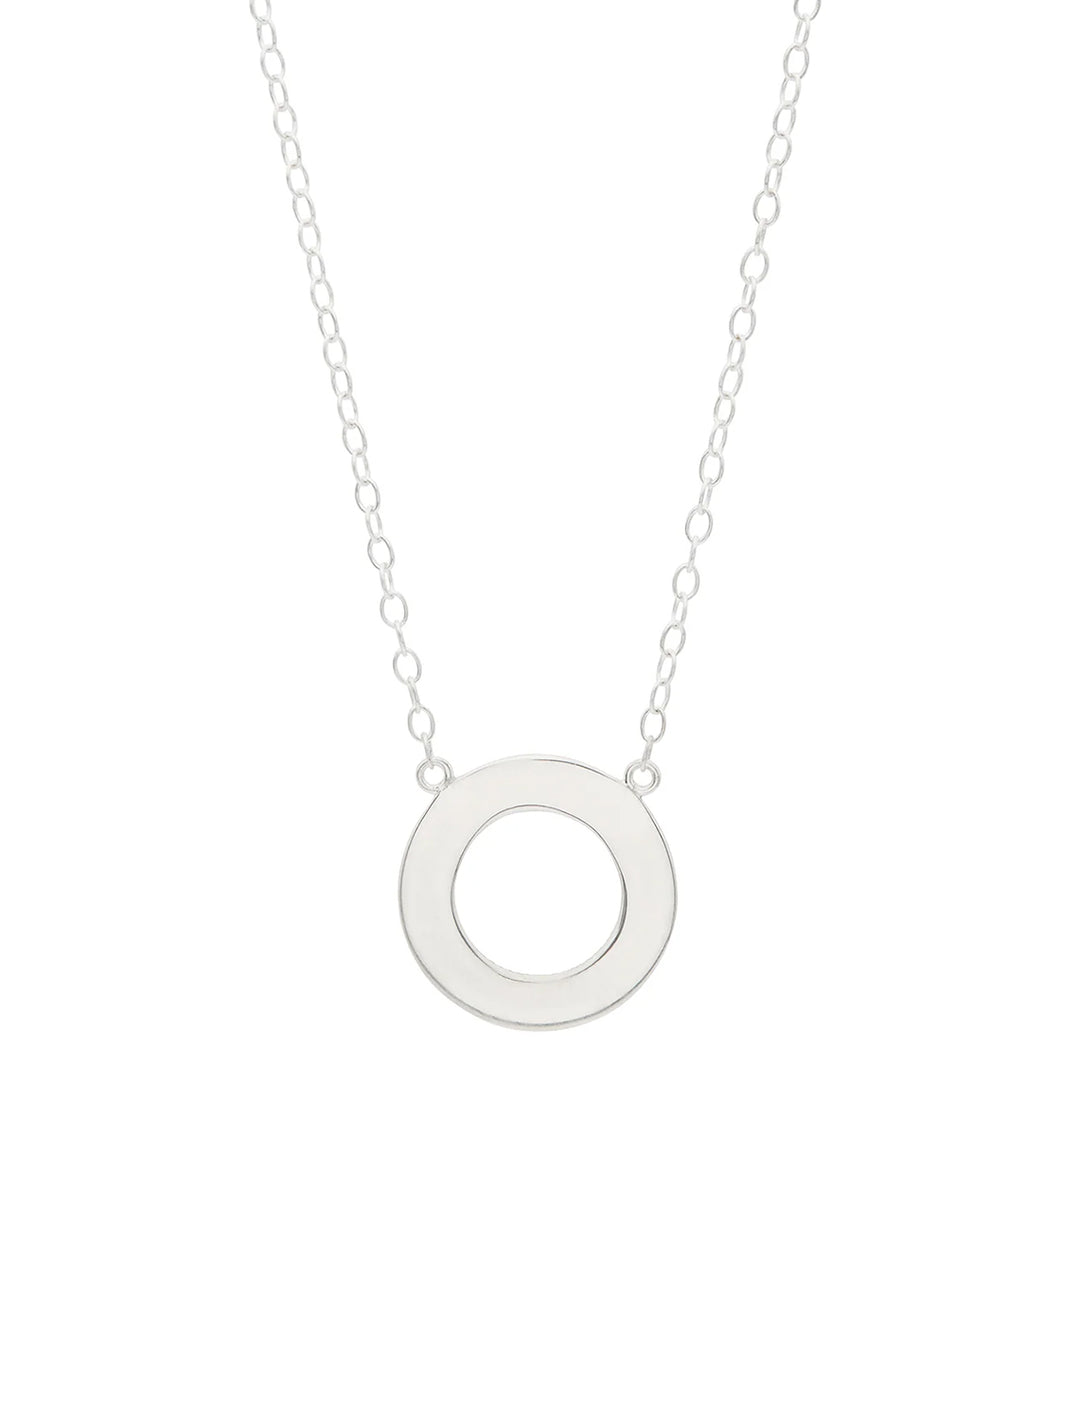 Back view of Anna Beck's classic open circle necklace | 16-18".